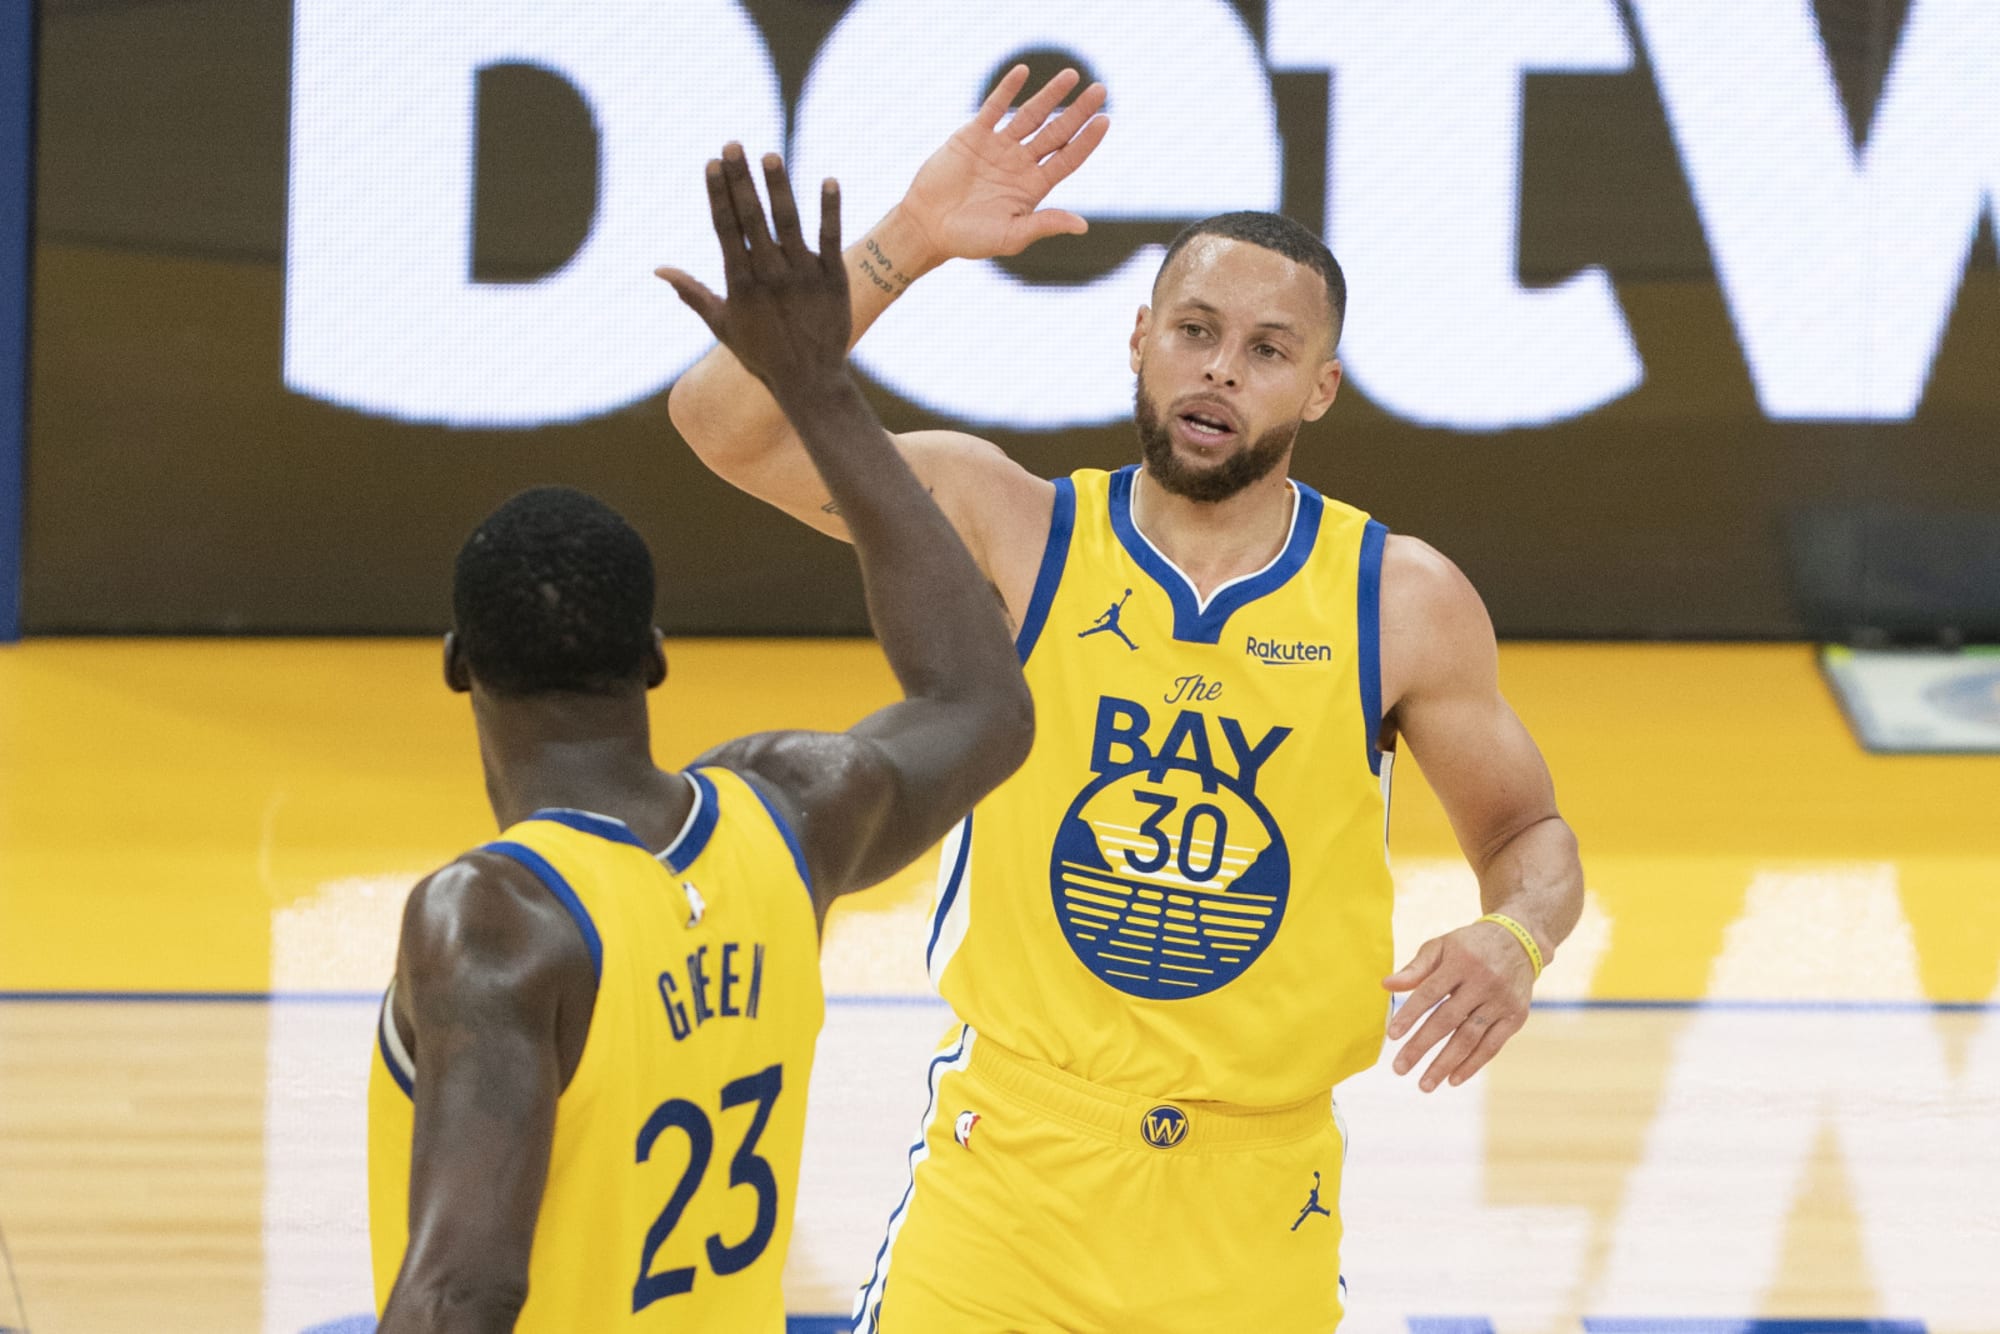 Steph Curry was the real Western Conference Player of the Week